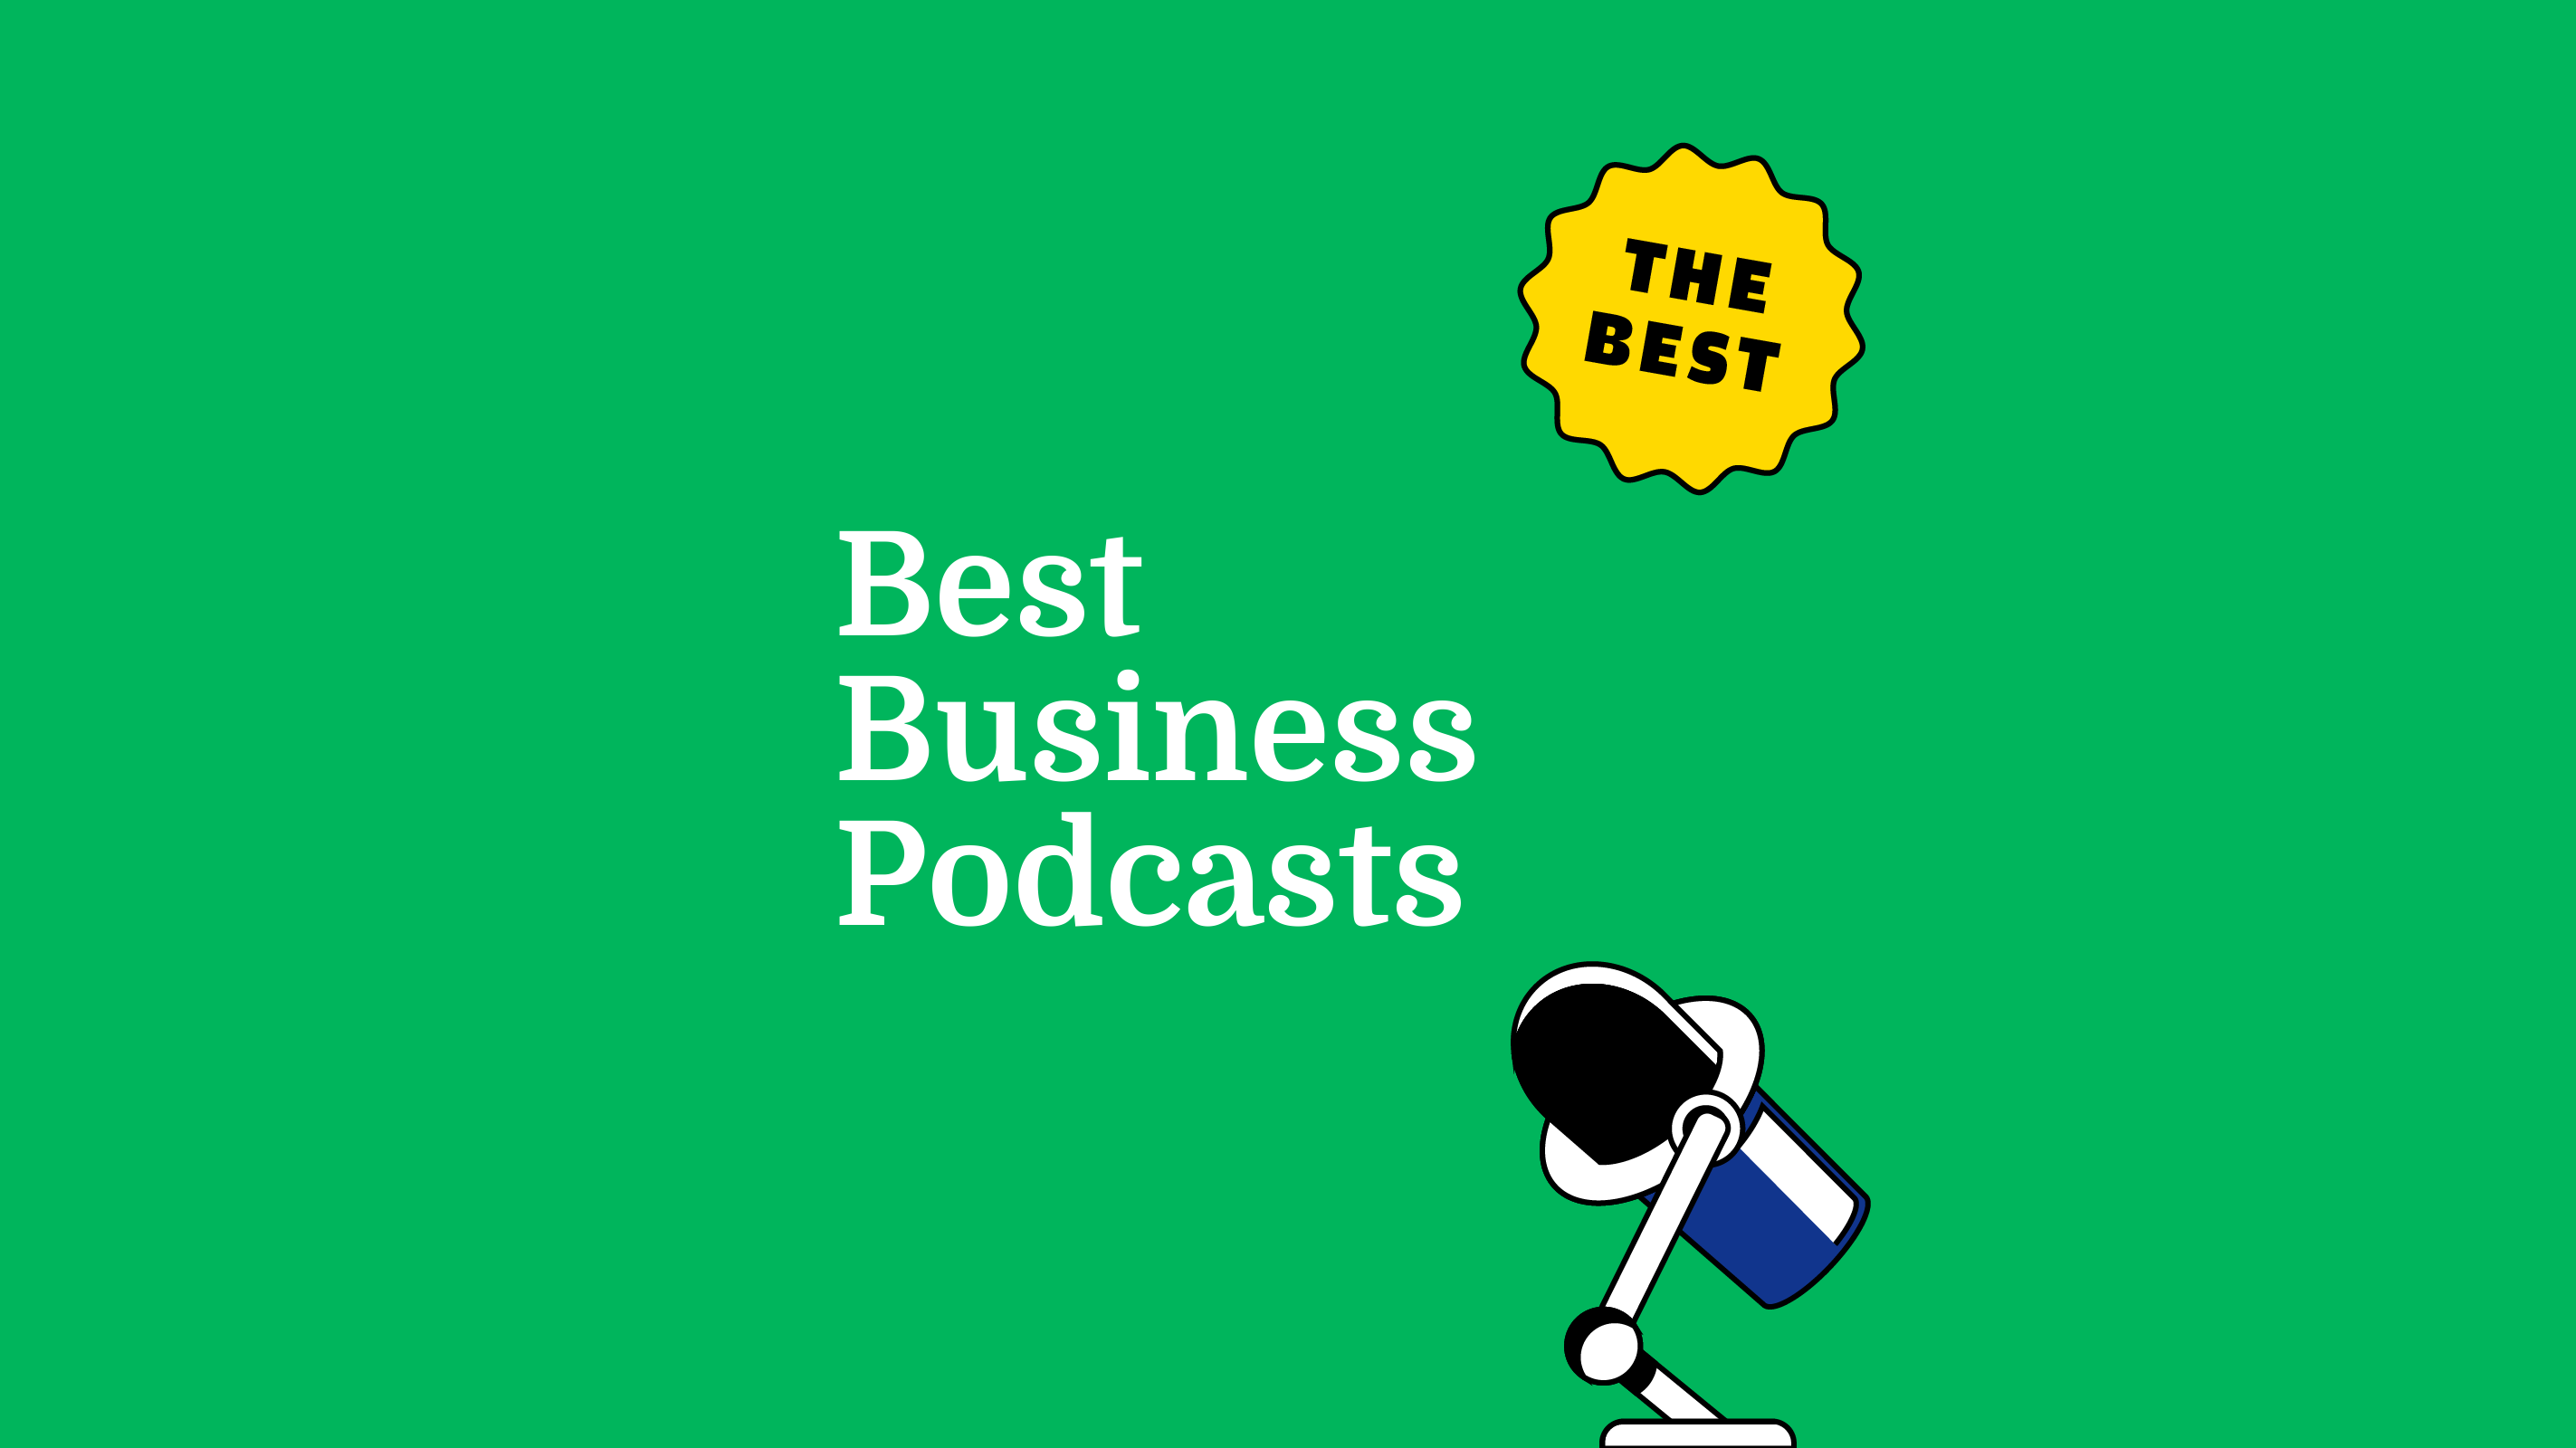 REV-best-business-podcasts-featured-image-4430